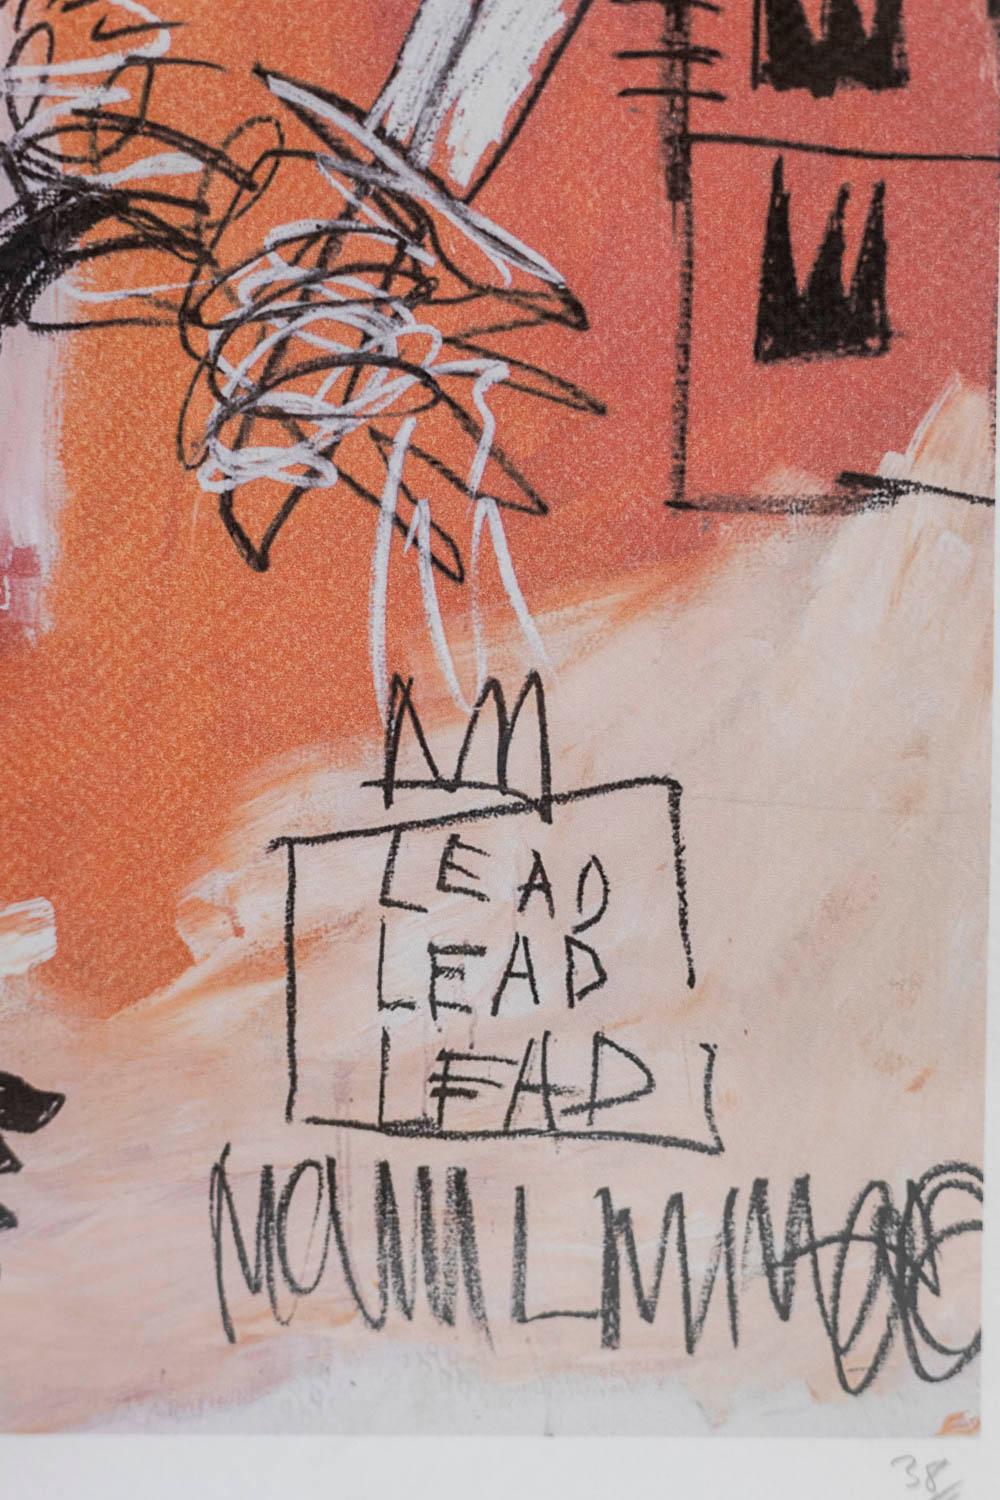 Jean-Michel Basquiat, signed and numbered.

Abstract screen print in orange and pink tones, in its blond oak frame.

American work realized in the 1990s.

Numbered 38/100.

Dimensions: H 50 x W 70 x D 2 cm

Reference: LS5848E131A